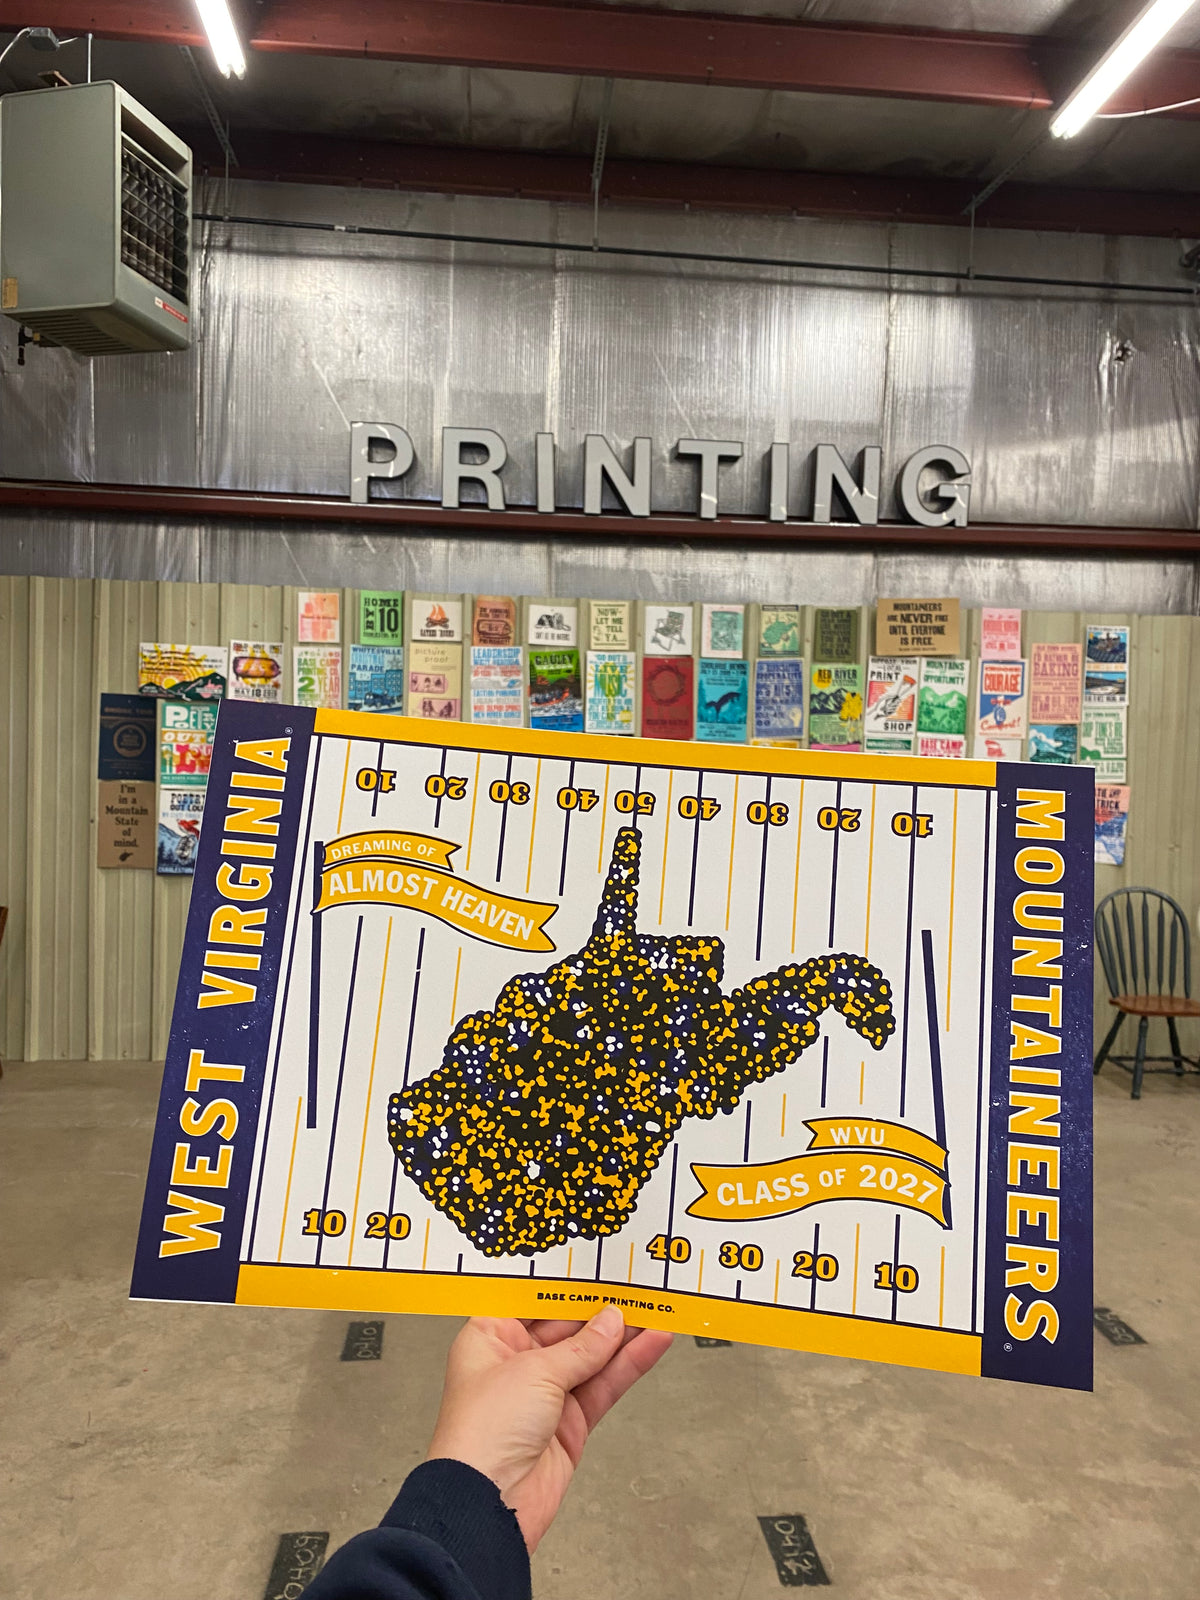 Limited Edition WVU Class of 2027 Print